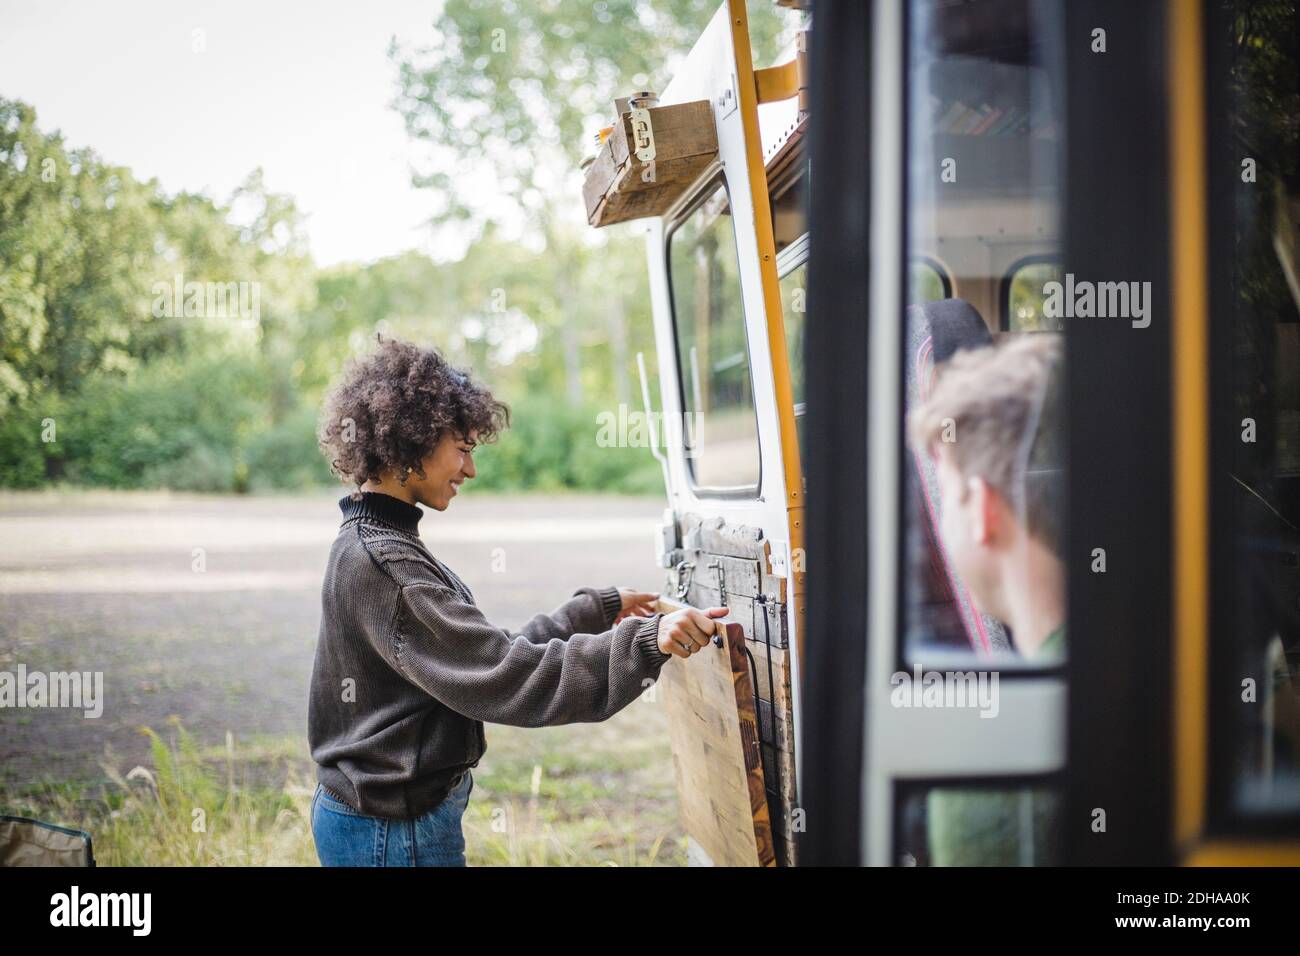 Side view of smiling woman adjusting wood on caravan door during camping in forest Stock Photo